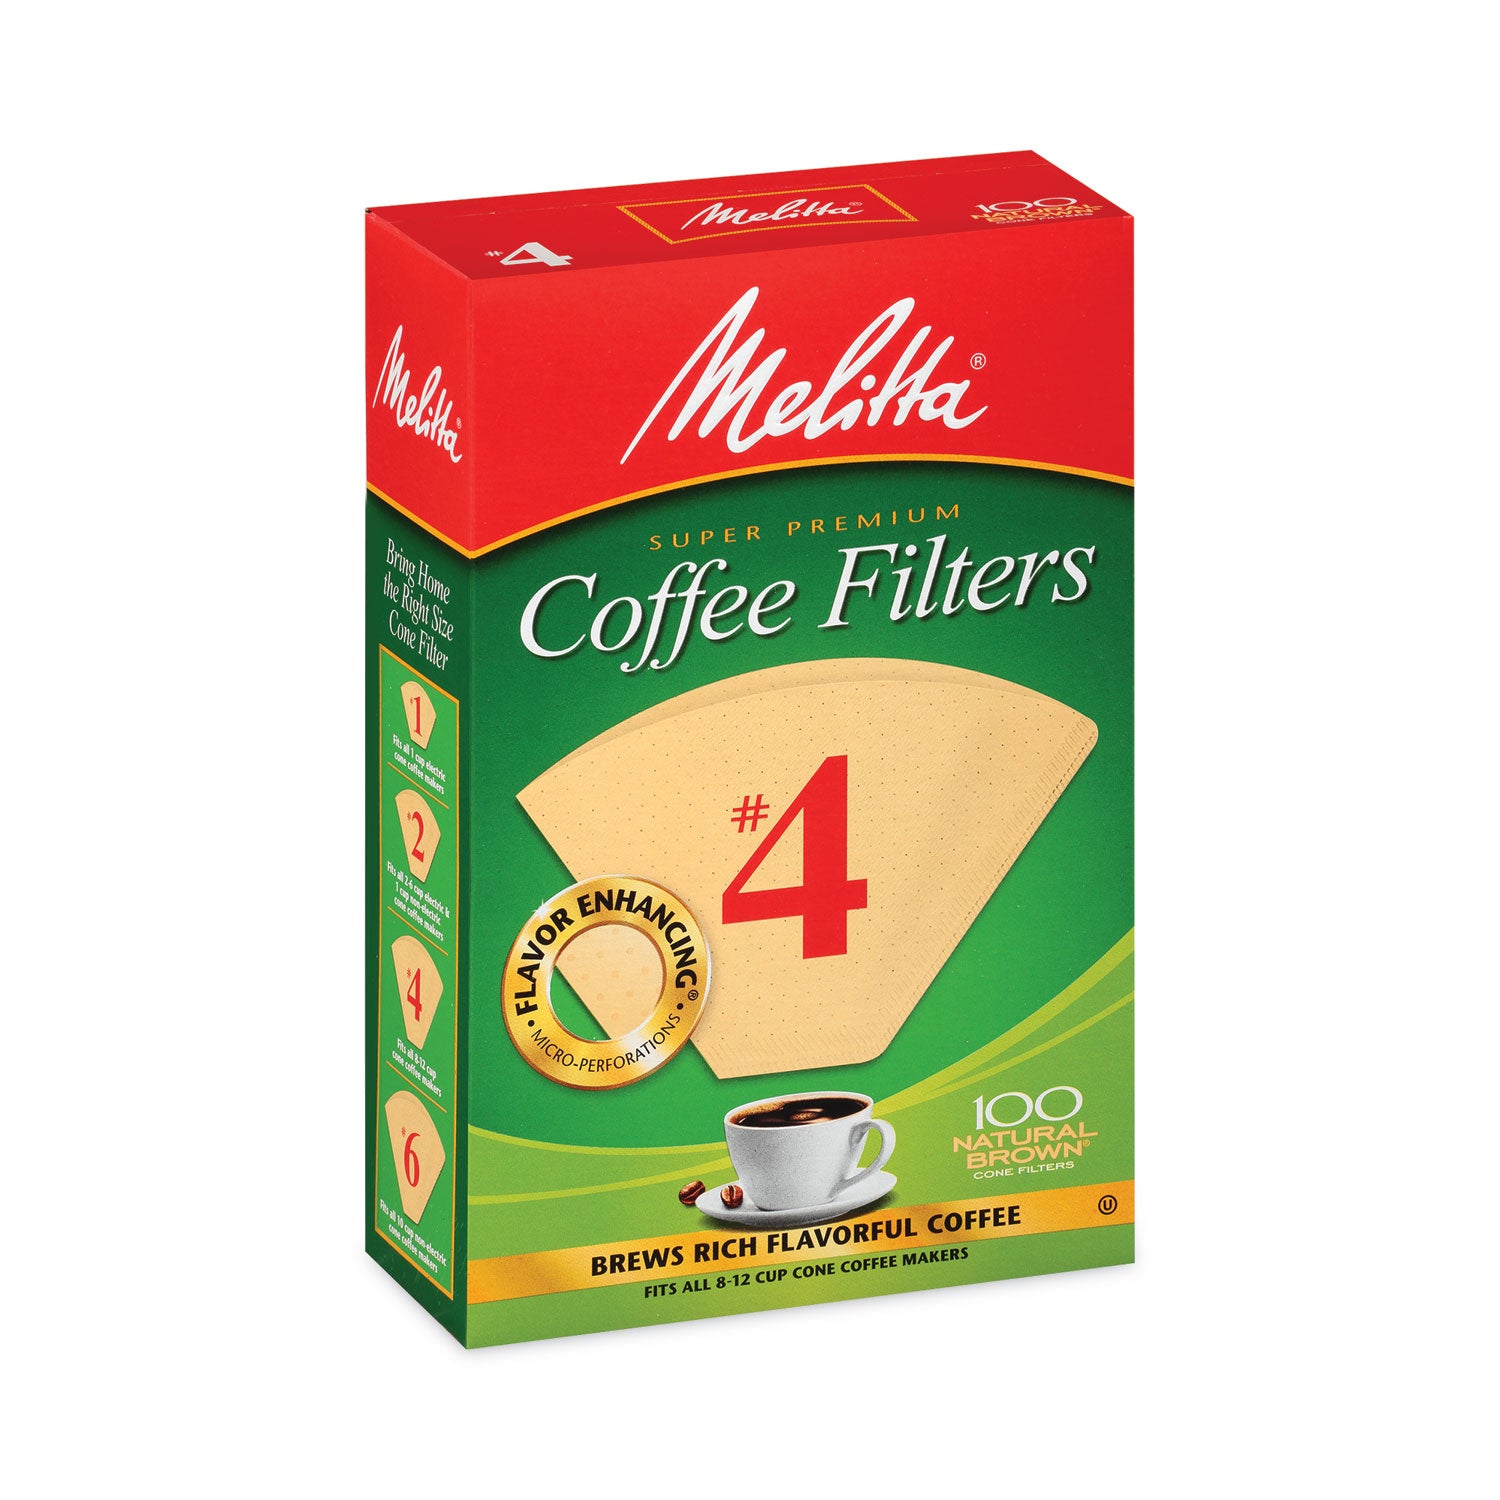 melitta-coffee-filters-#4-8-to-12-cup-size-cone-style-100-filters-pack-3-pack-ships-in-1-3-business-days_grr22000695 - 2